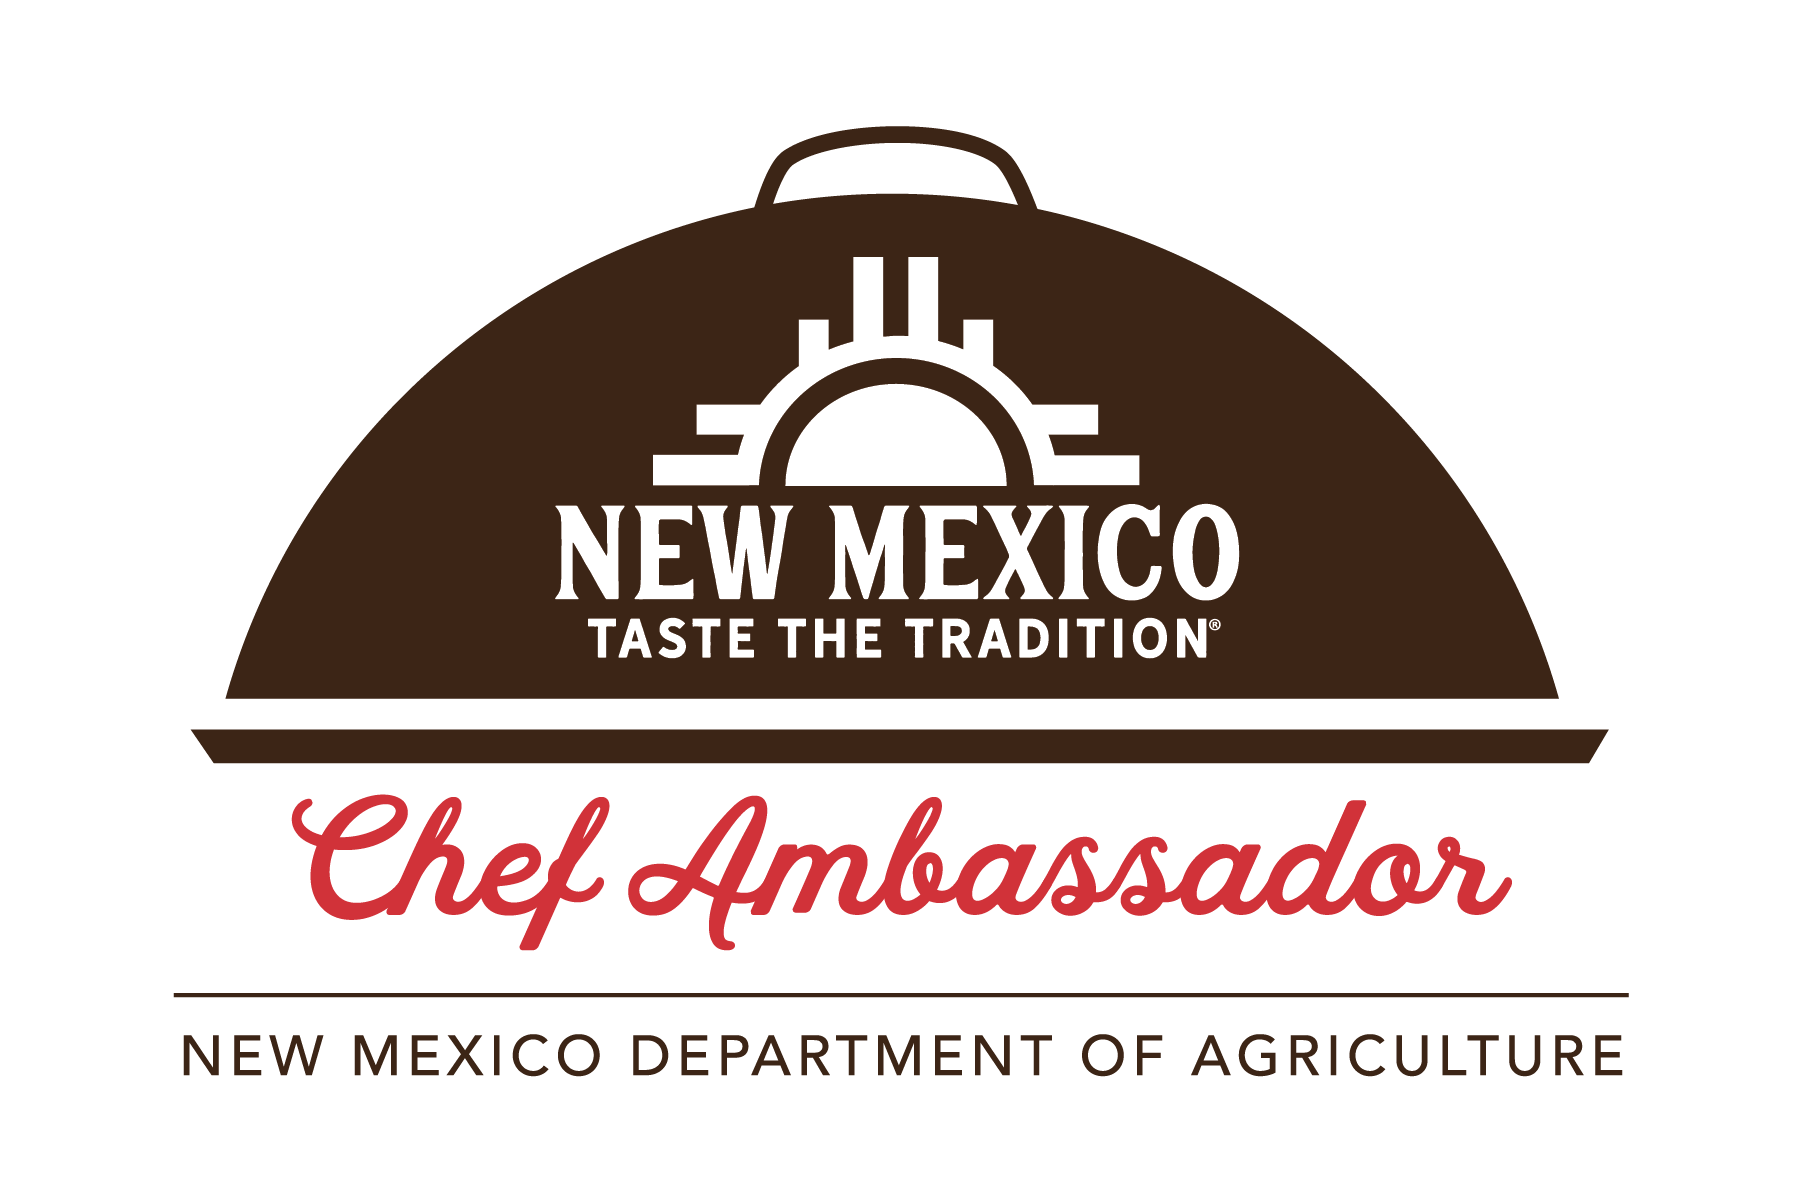 An image of a brown serving dish with a rounded lid with a top handle. The lid contains the New Mexico Taste the Tradition logo with a sun and sun rays in white font. Under the serving dish are the words “Chef Ambassador” in a red cursive font, with a brown horizontal line underneath, with NEW MEXICO DEPARTMENT OF AGRICULTURE in all caps, brown font under the line.